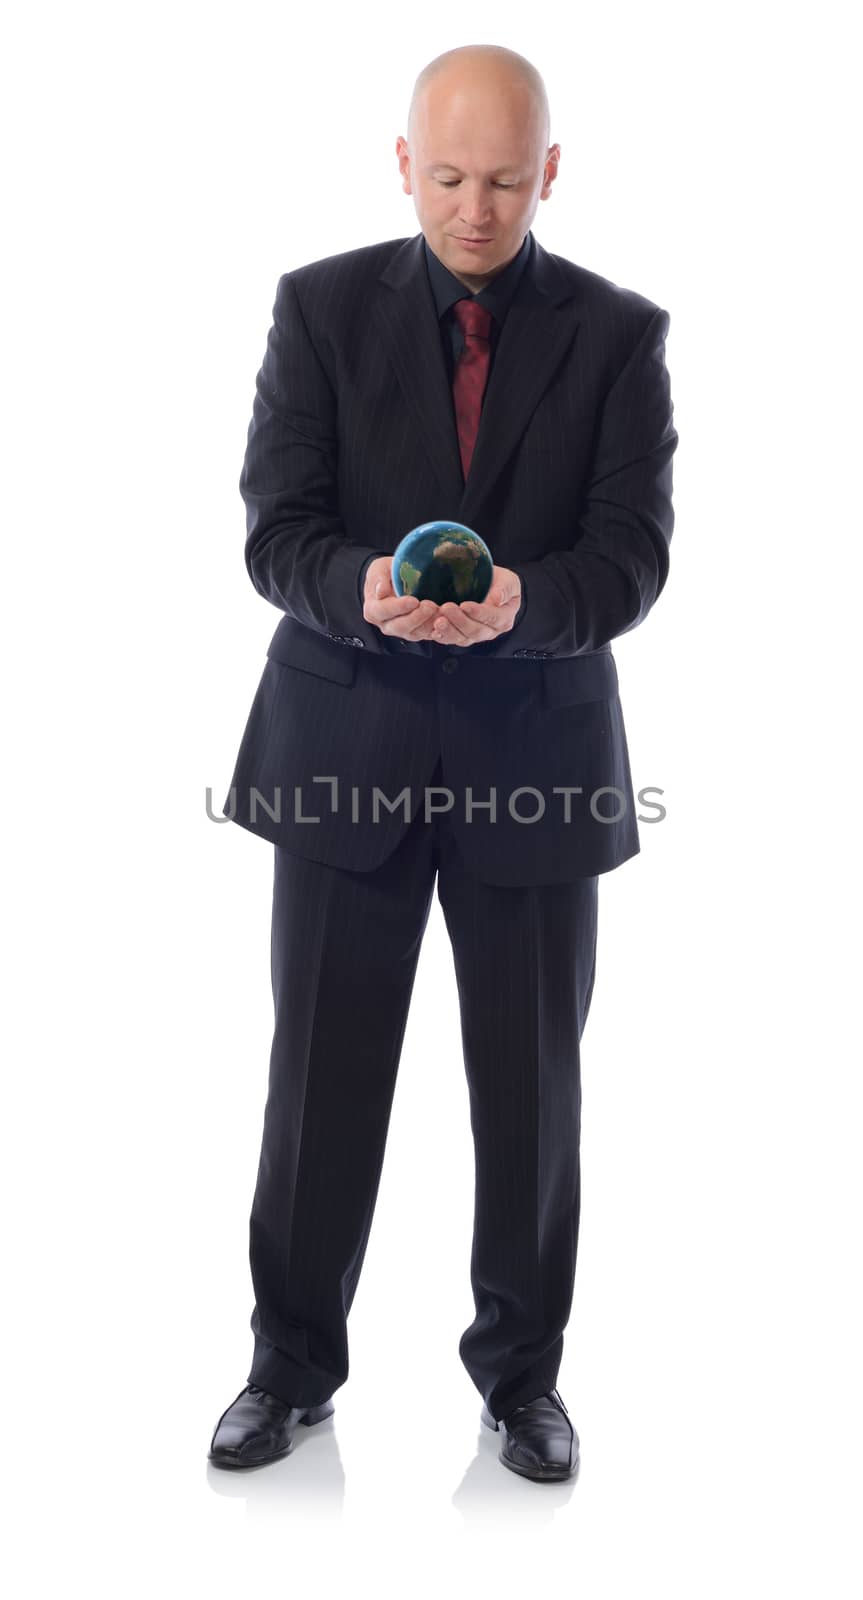 man in a suit holding the planet earth isolated on white background